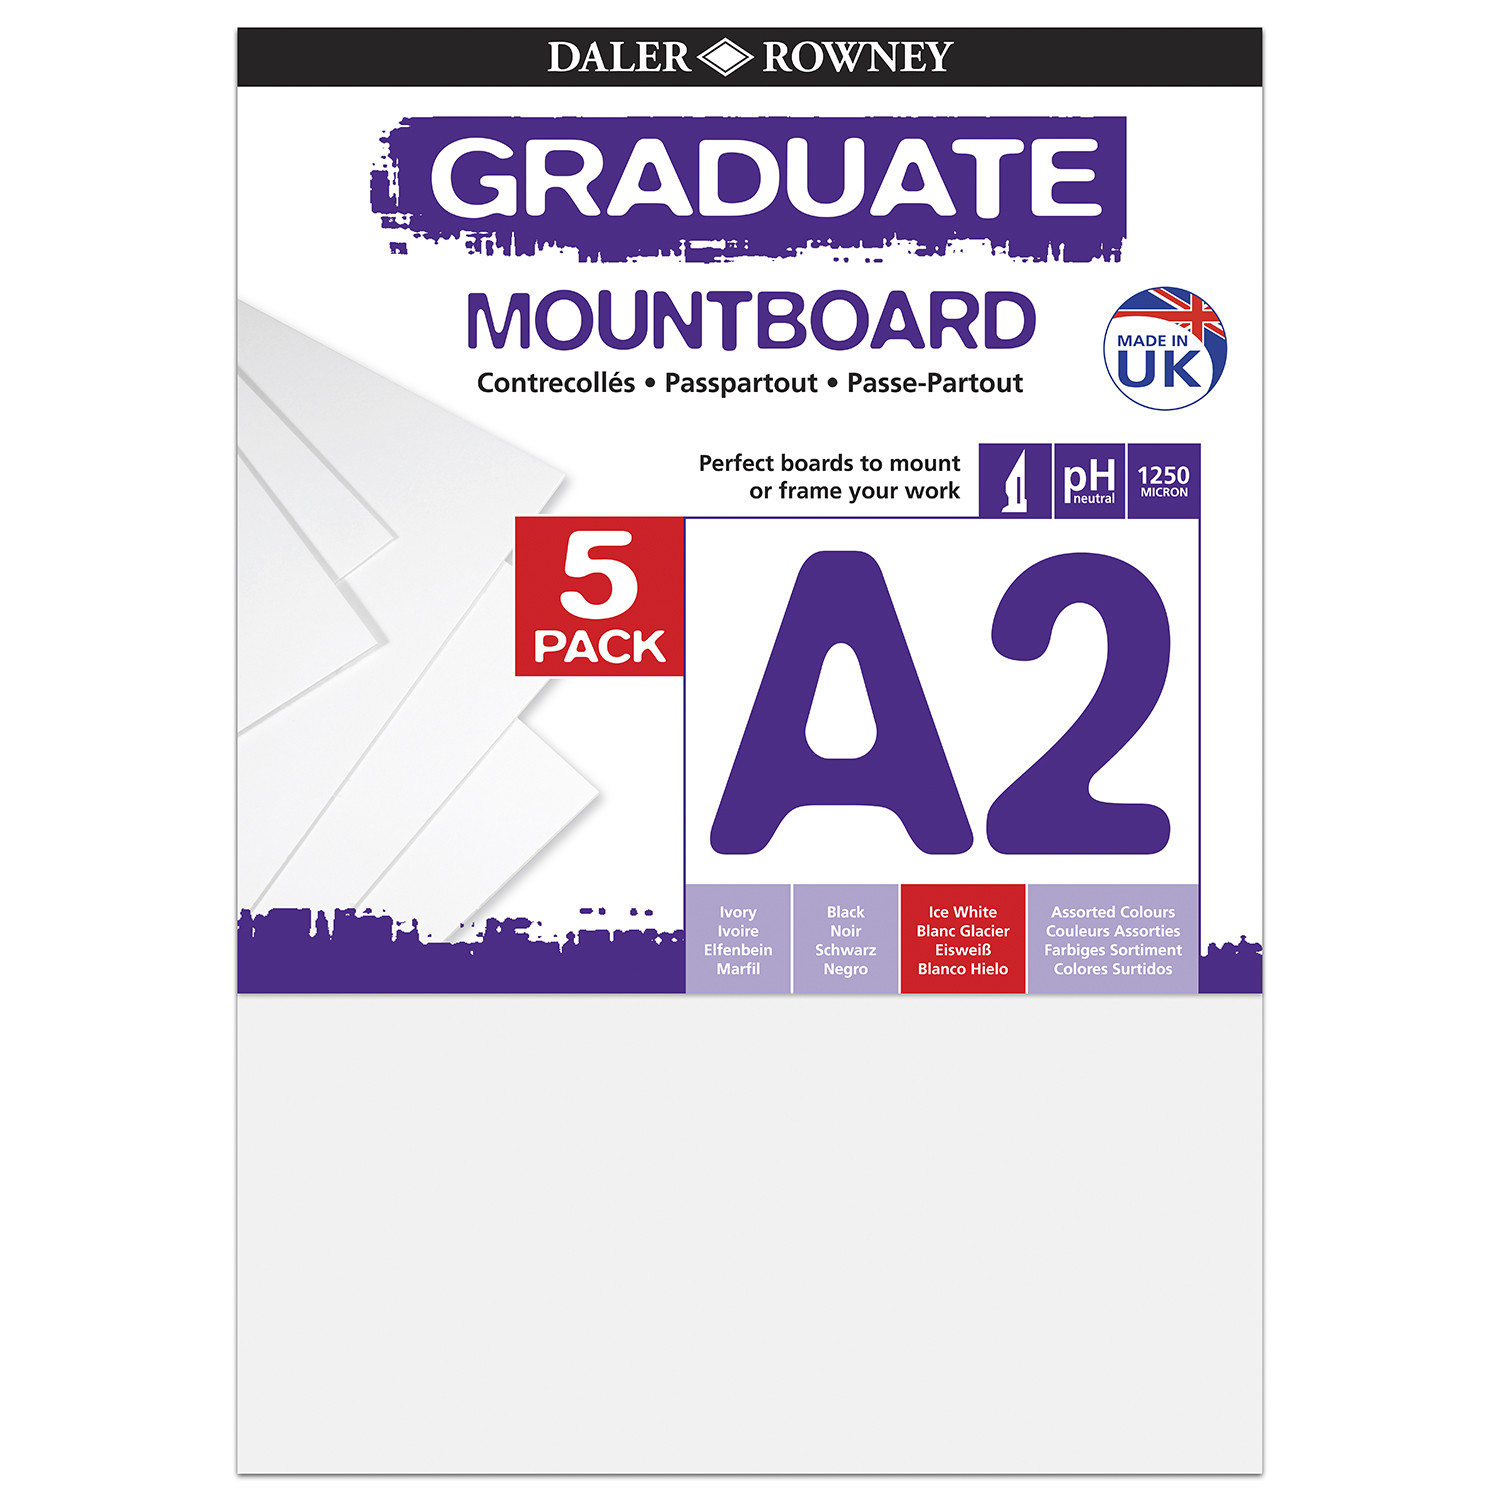 Daler Rowney Ice White Graduate Mountboard A2 5 Pack Image